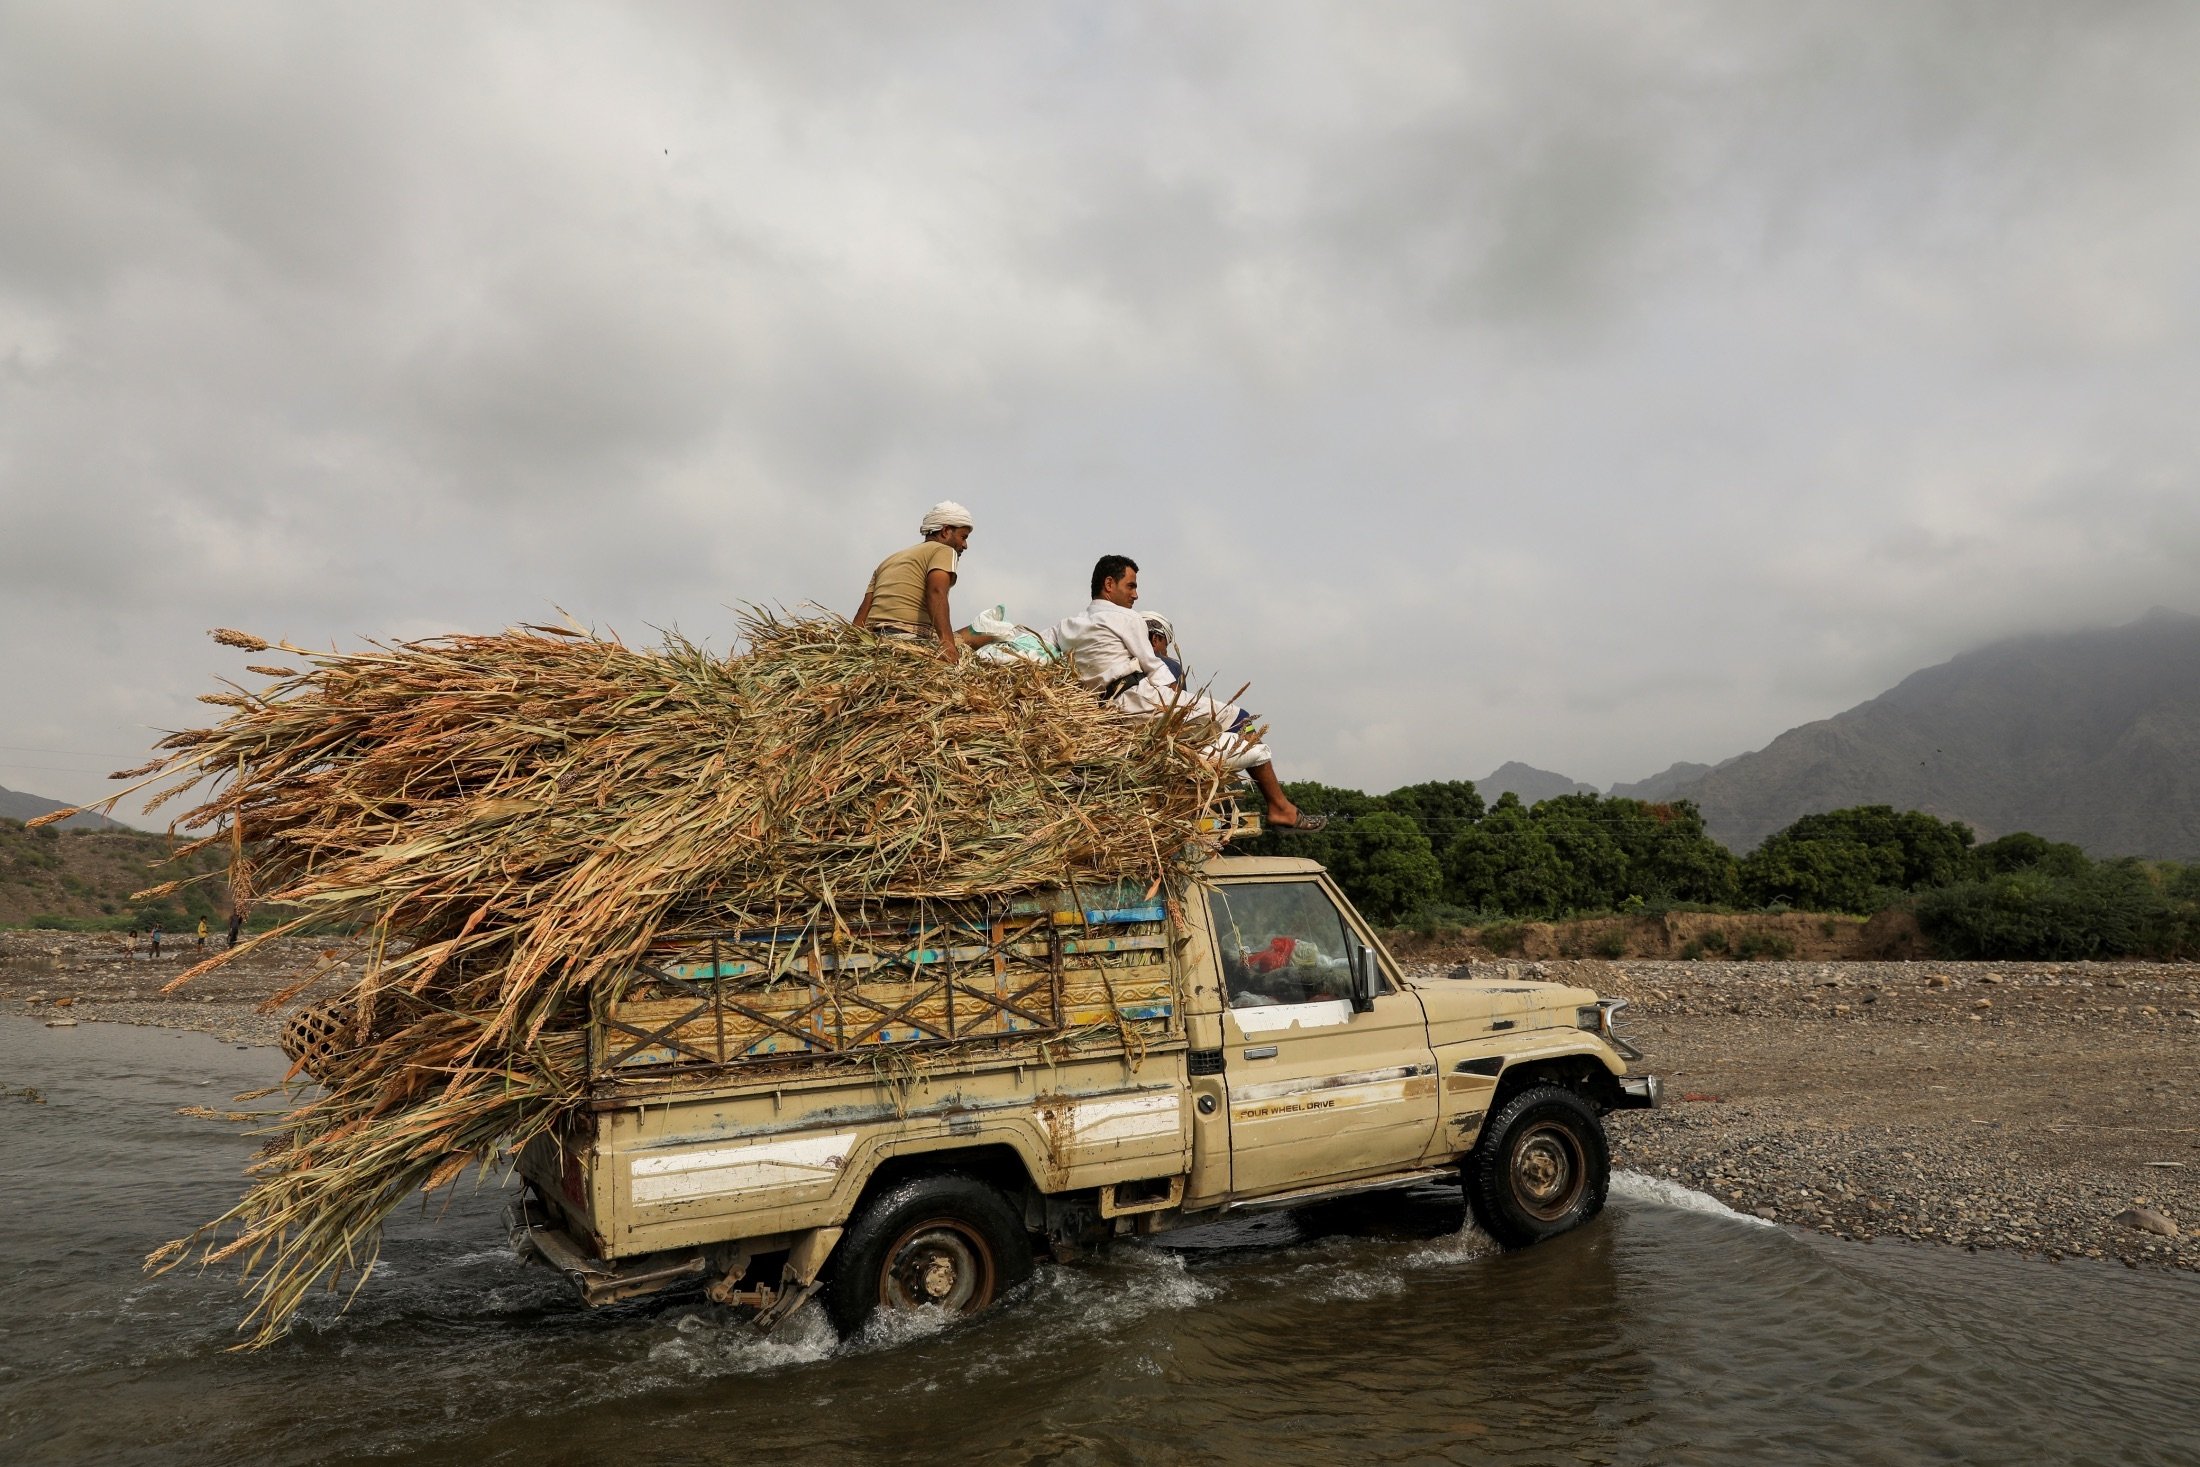 Villagers ride on top a vehicle loaded with fodder as they cross a spring lake in Khamis Banisaad district of al-Mahweet province, Yemen, June 23, 2021. (Reuters Photo)